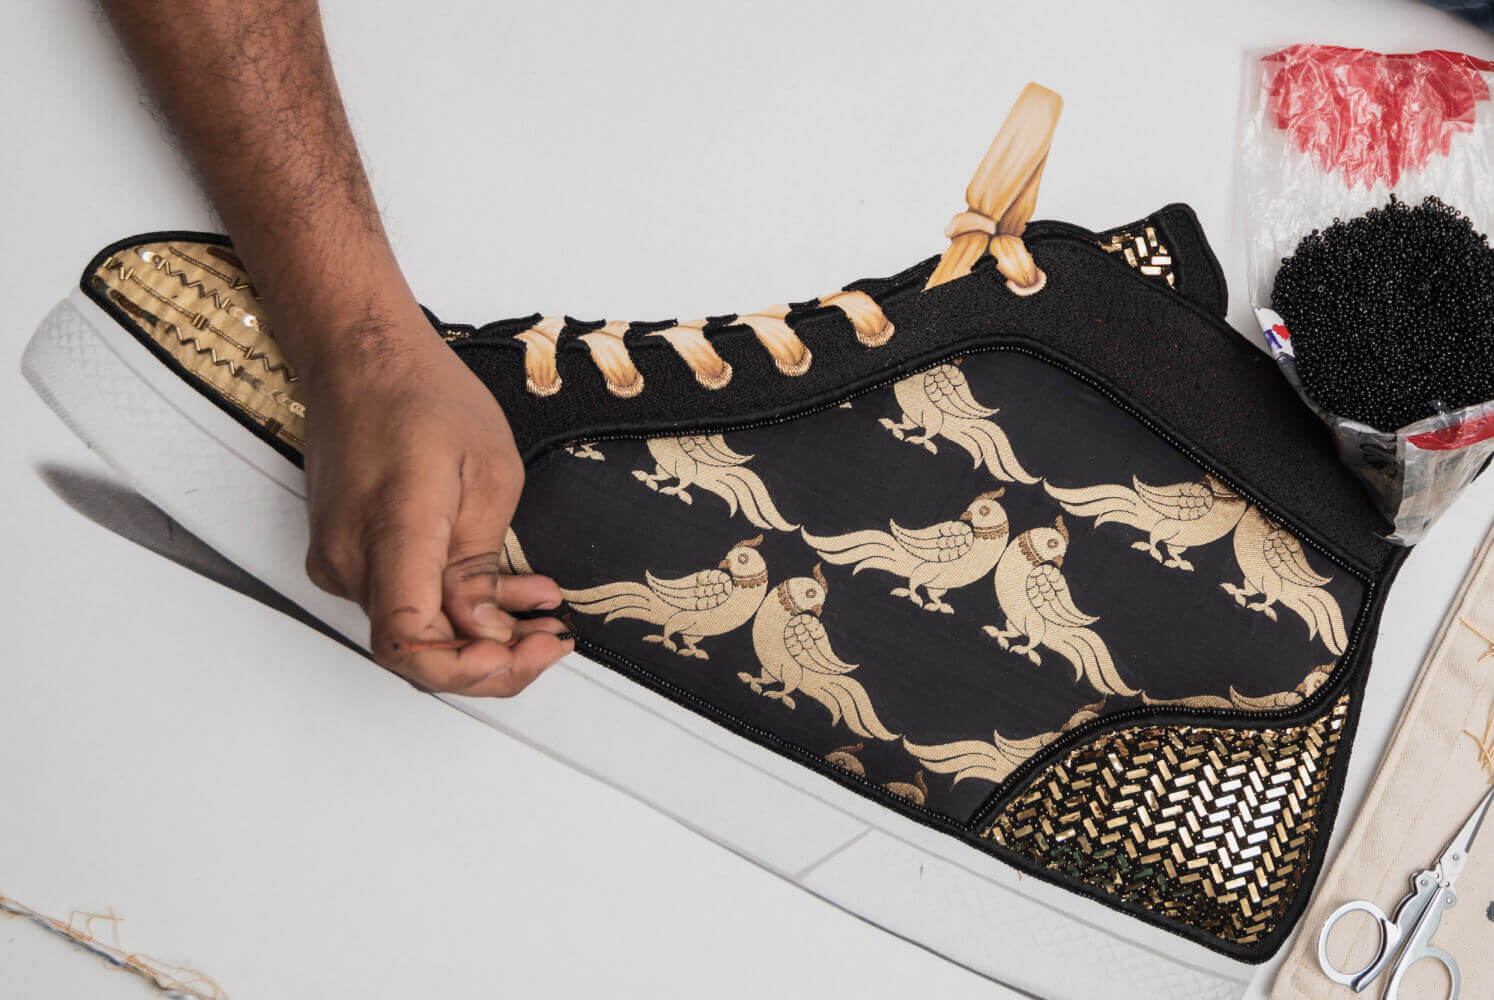 making of a limited edition sneaker textile artwork in black and gold